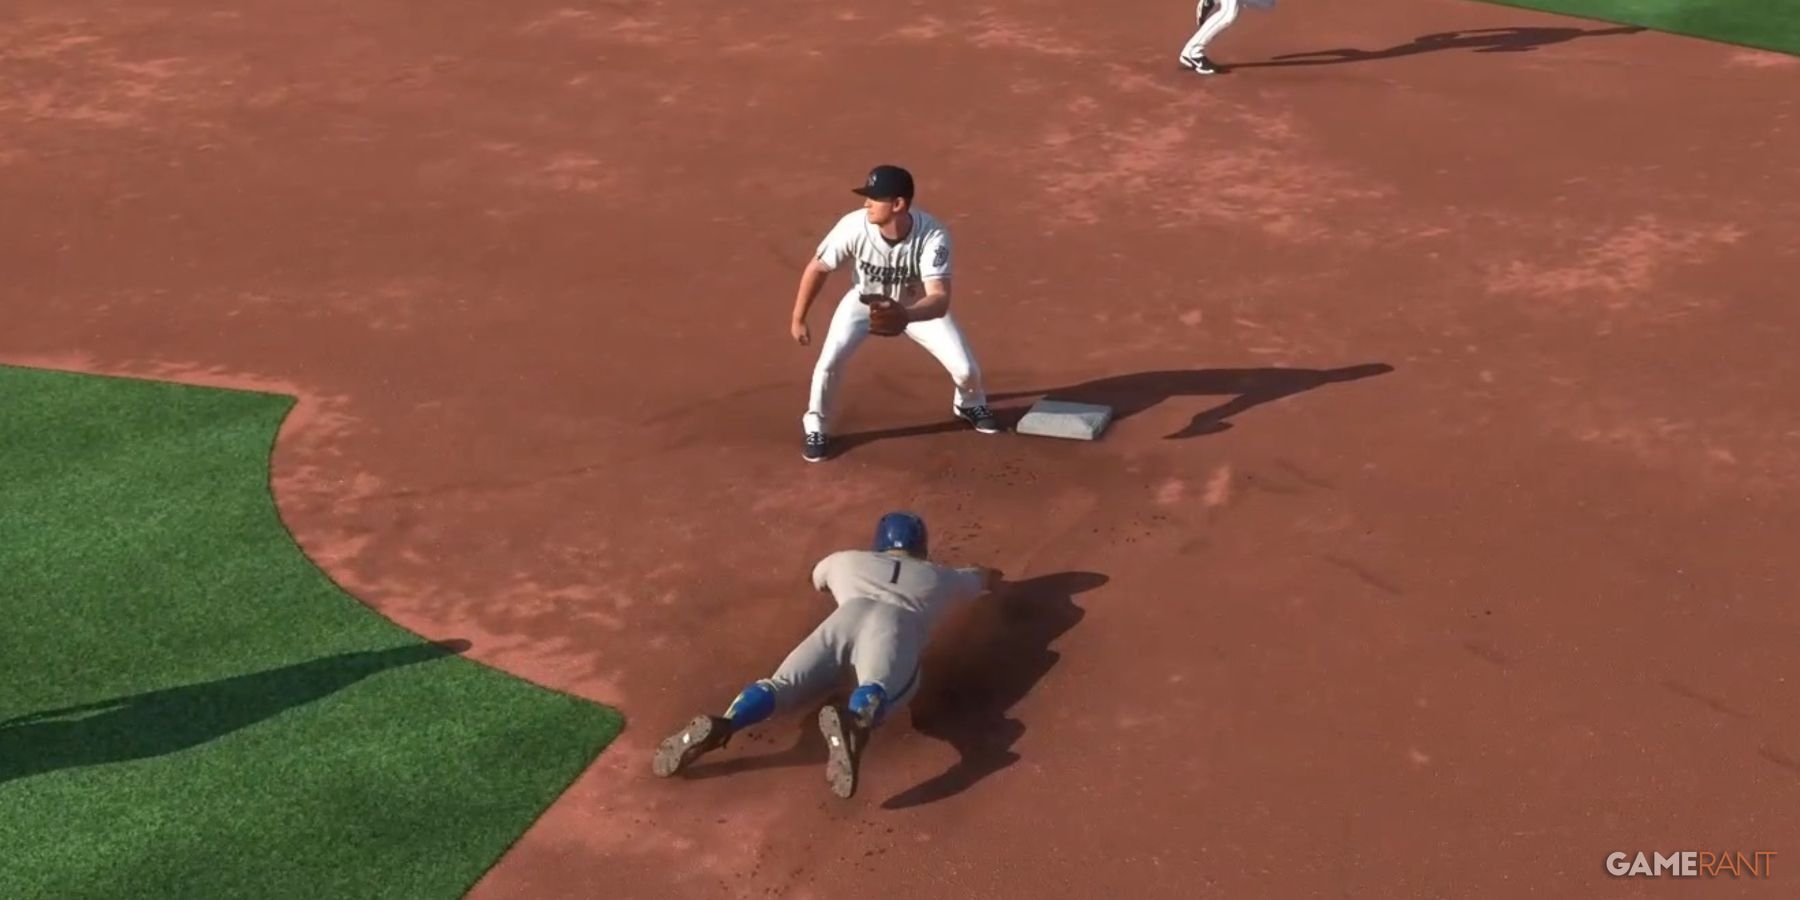 MLB The Show 23 Headfirst Slide Into Second